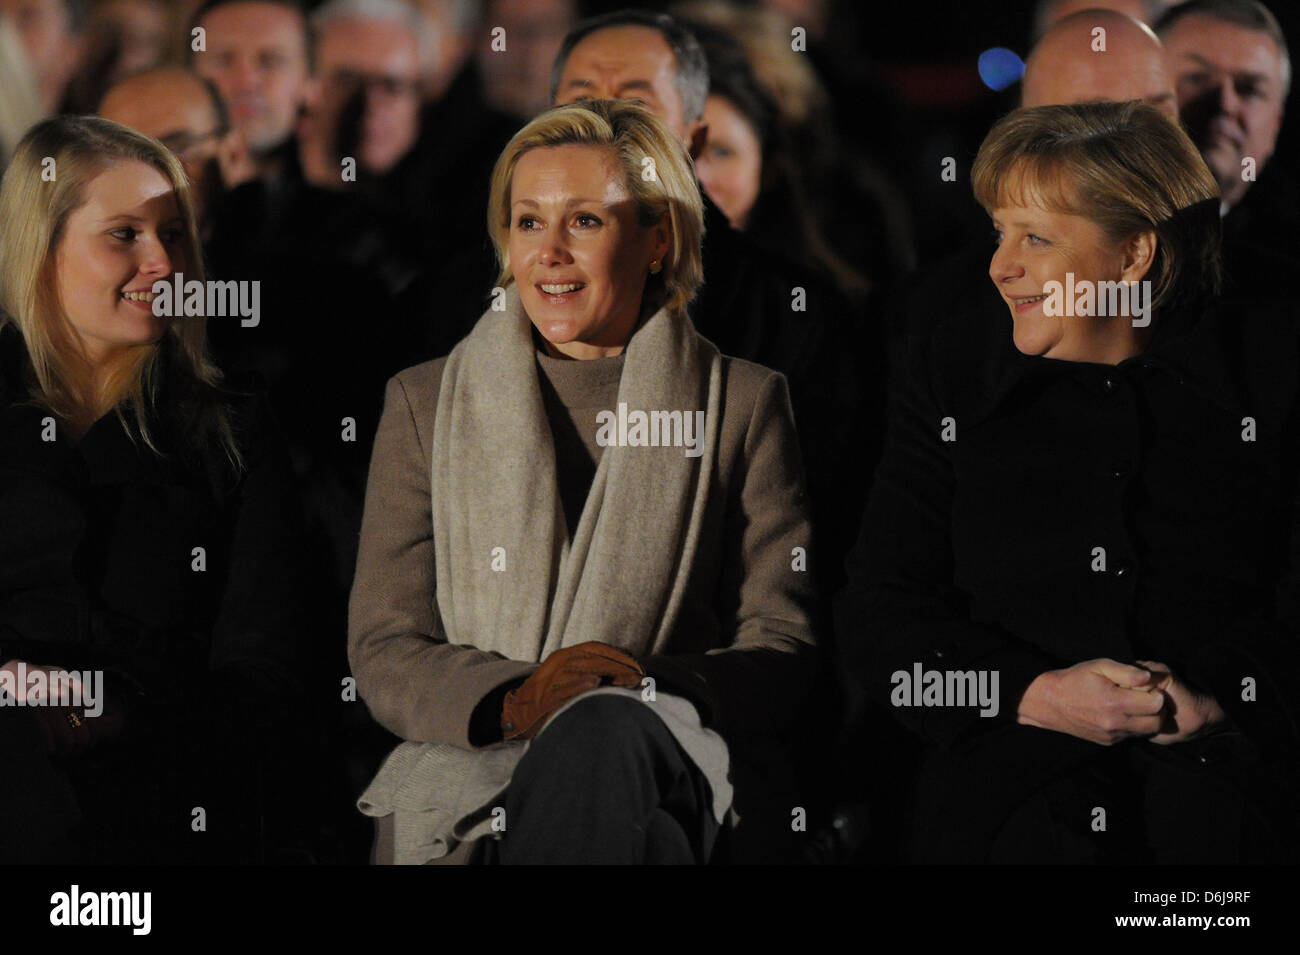 Wife of former German president Christian Wulff, Bettina Wulff, sits next to German Chancellor Angela Merkel (R) and Wulff's daughter of his first marriage, Annalena, during the Grand Tattoo (Grosser Zapfenstreich) for former German president Christian Wulff in front of Bellevue Palace in Berlin, Germany, 08 March 2012. Wulff resigned on 17 February 2012 after accusations of taking Stock Photo